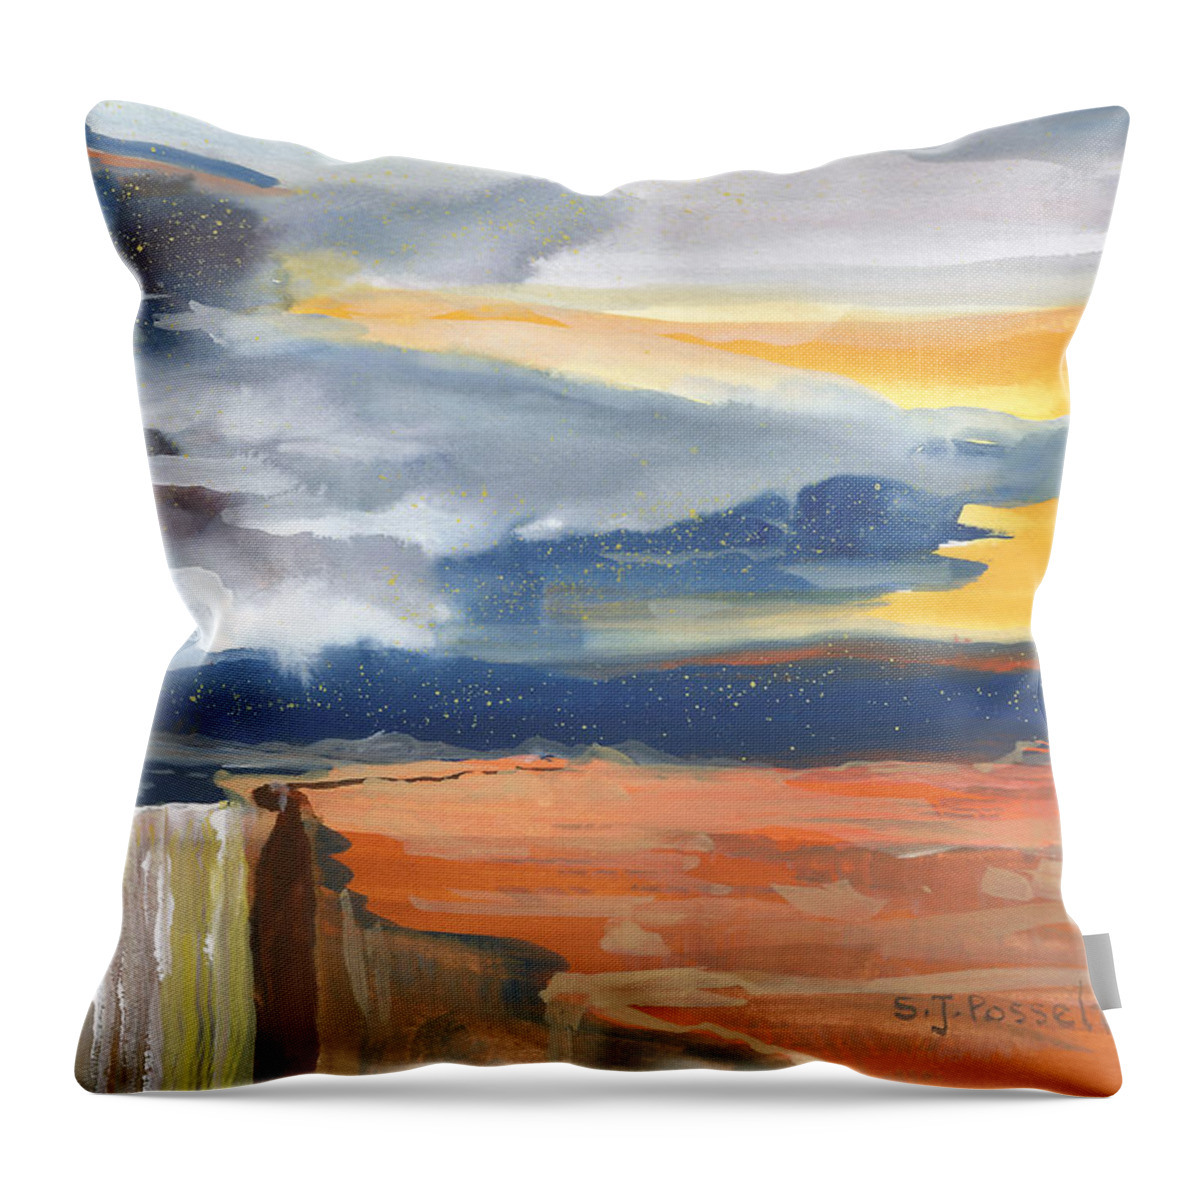 Early Throw Pillow featuring the painting Early Canyon Sky by Sheri Jo Posselt